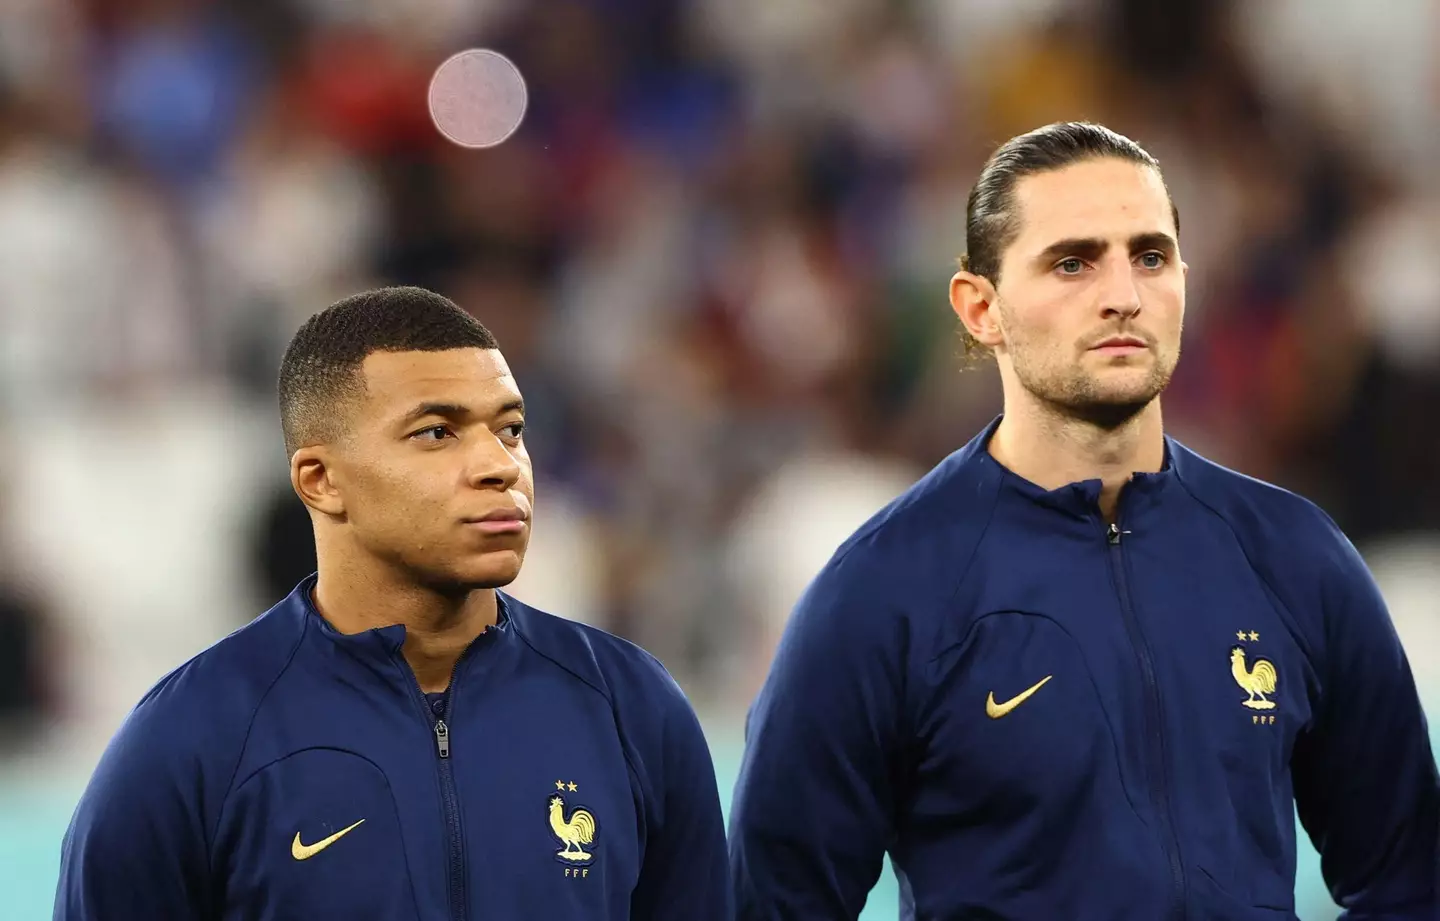 Mbappe and Rabiot at the World Cup earlier this month. (Image